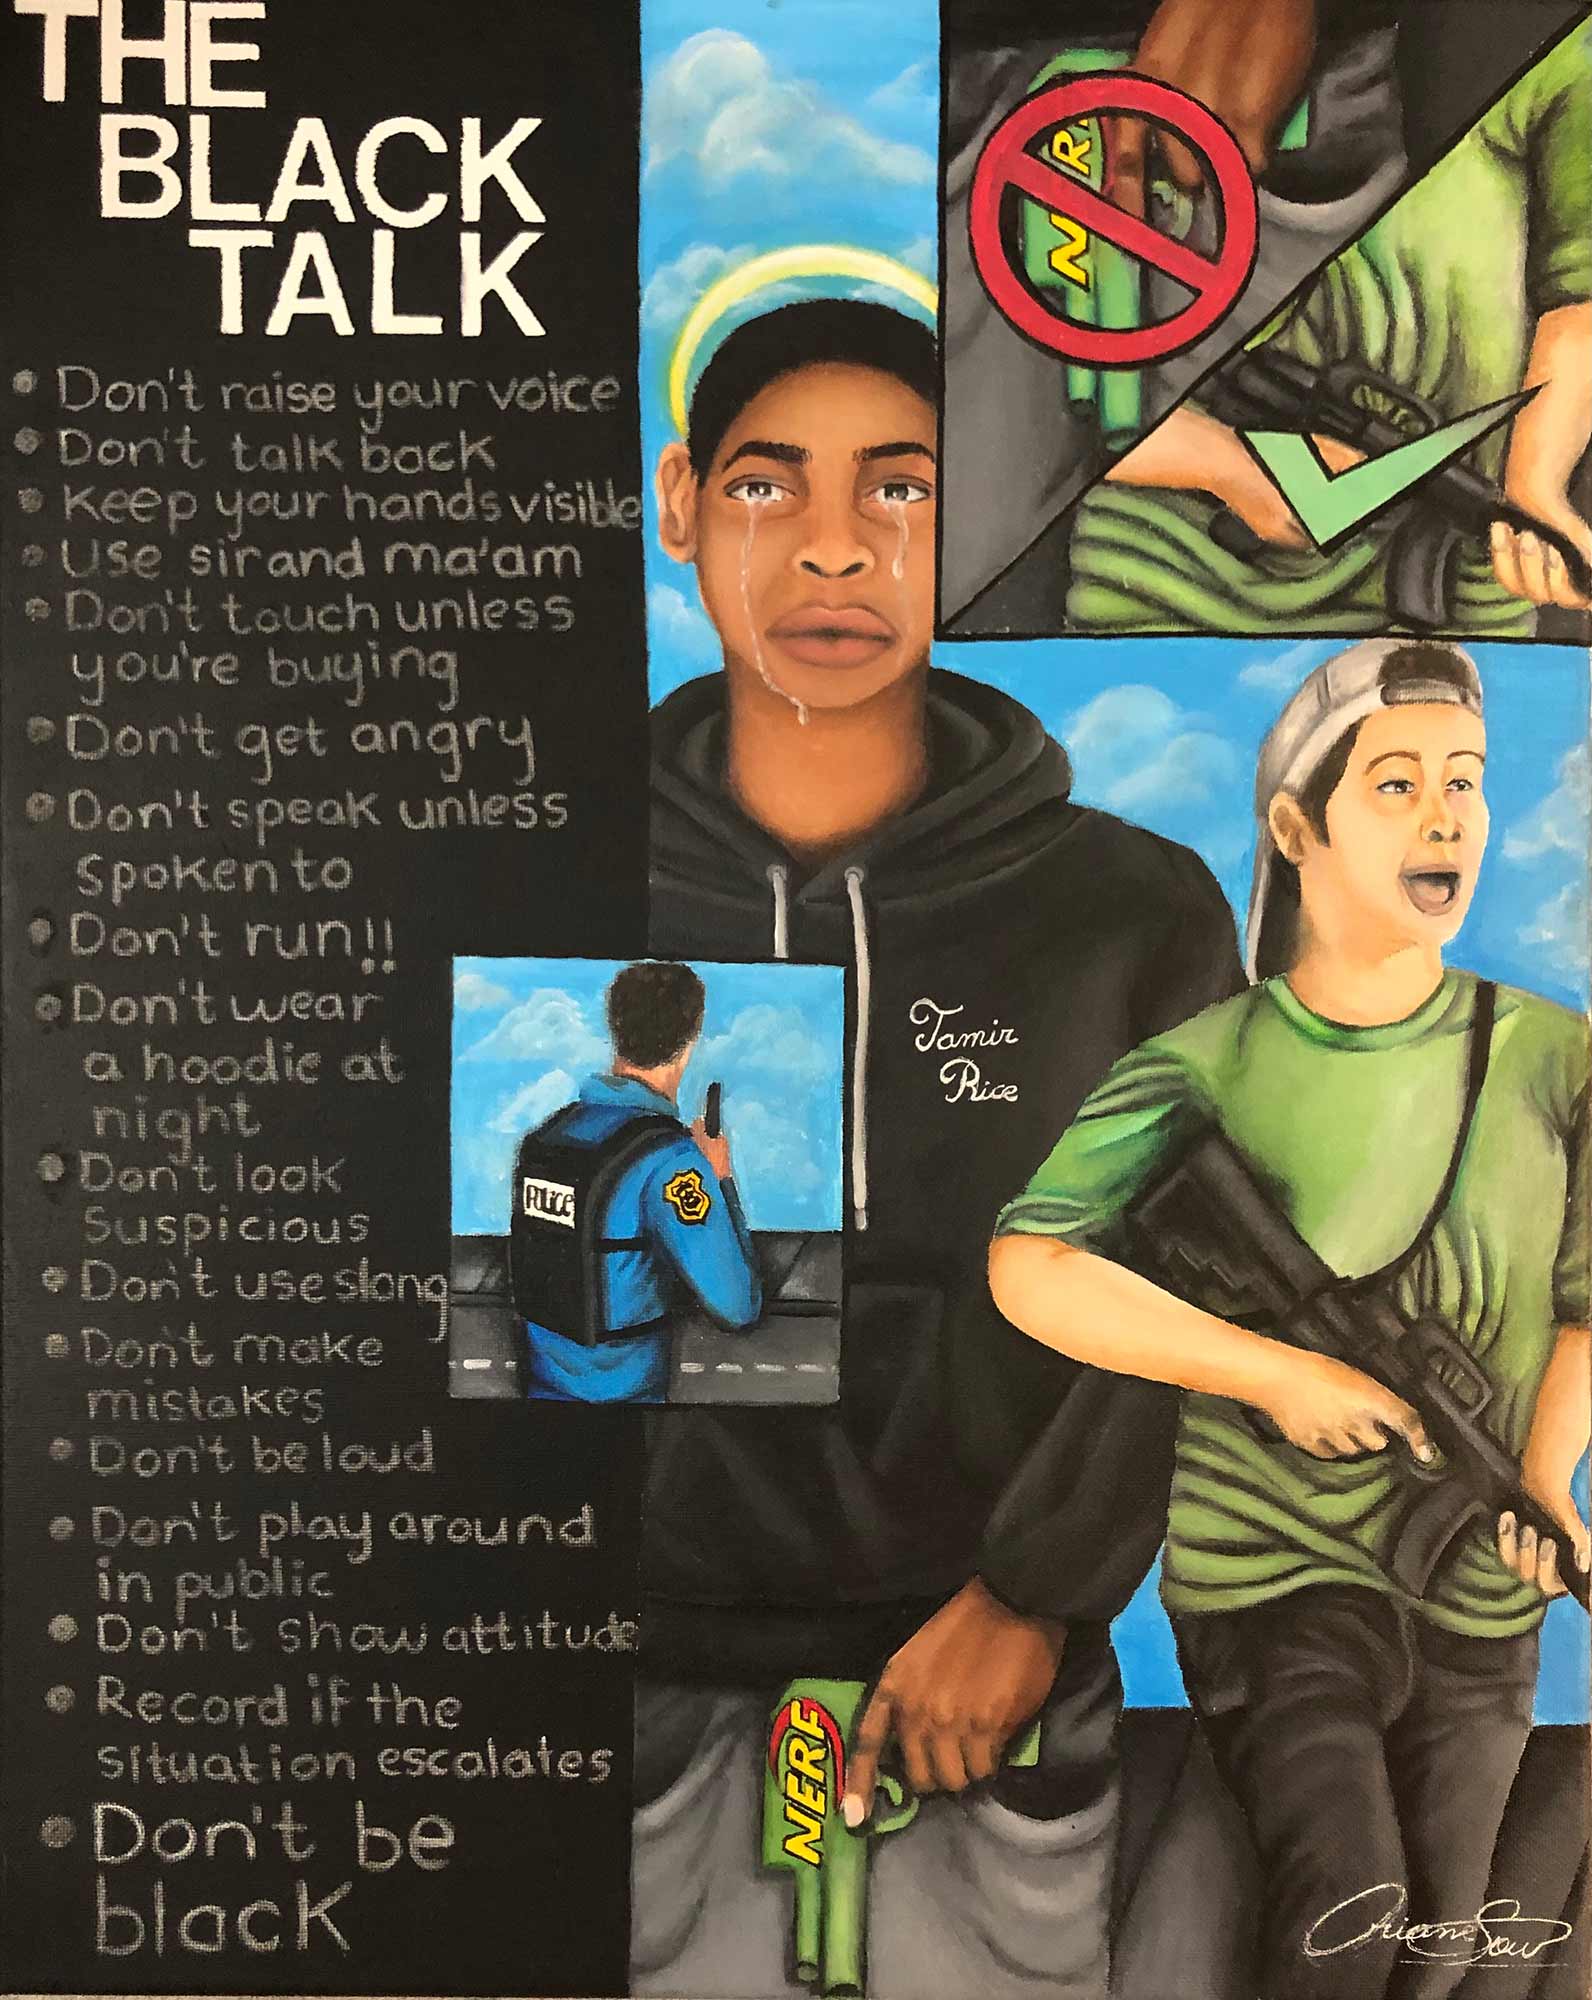 Portraits of Tamir Rice and Kyle Rittenhouse with a list titled "the black talk"